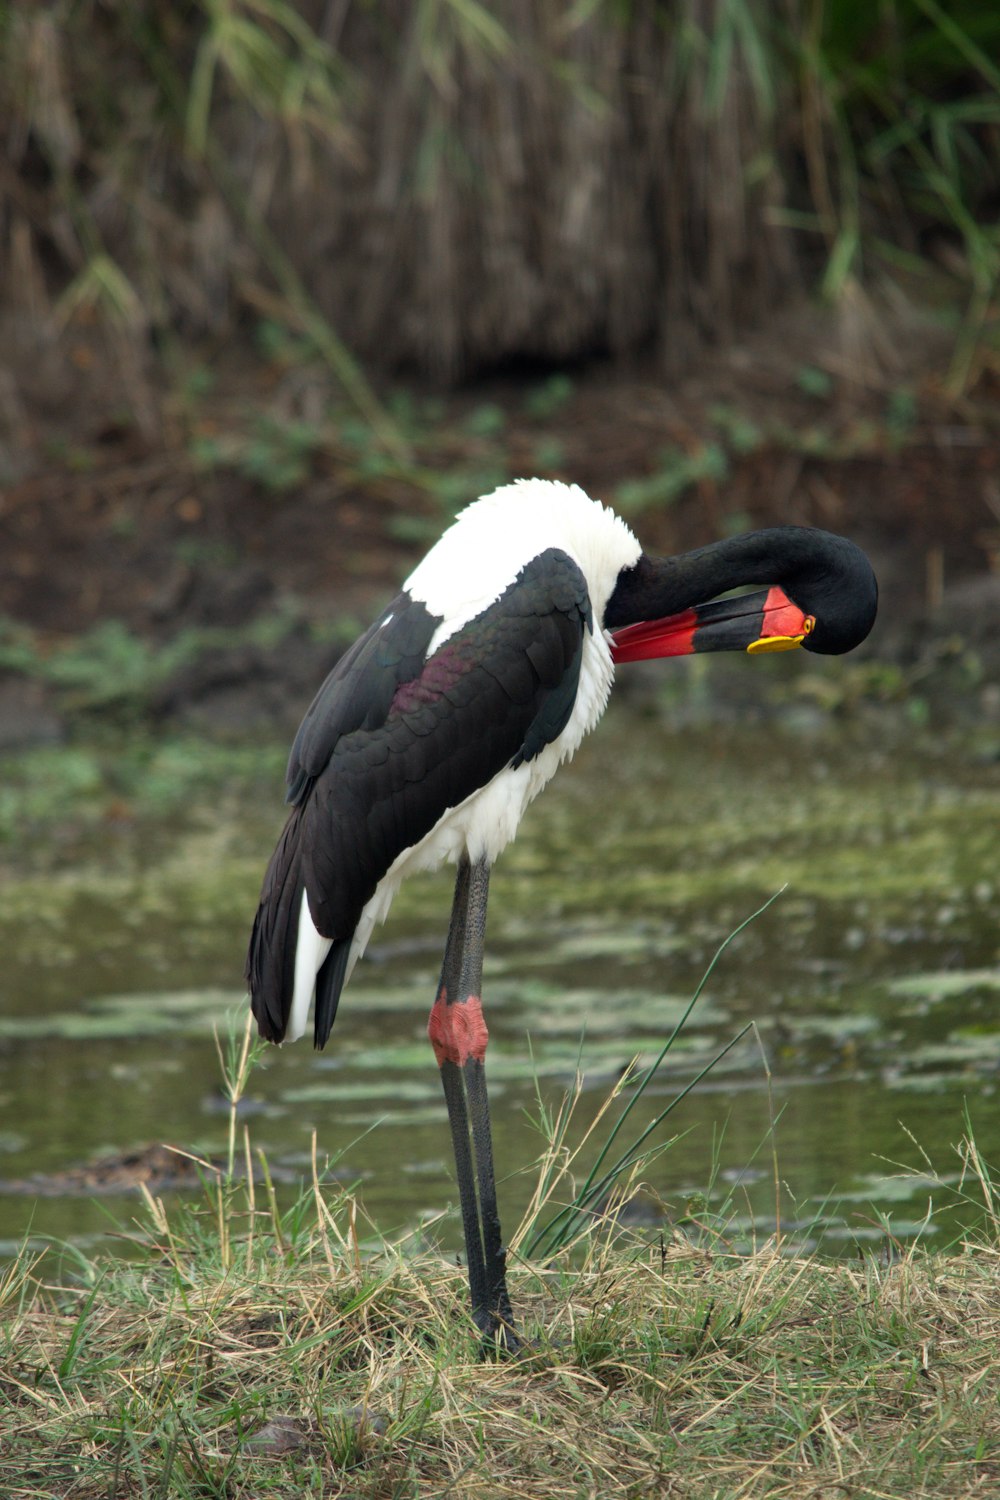 a black and white bird with a red and yellow beak